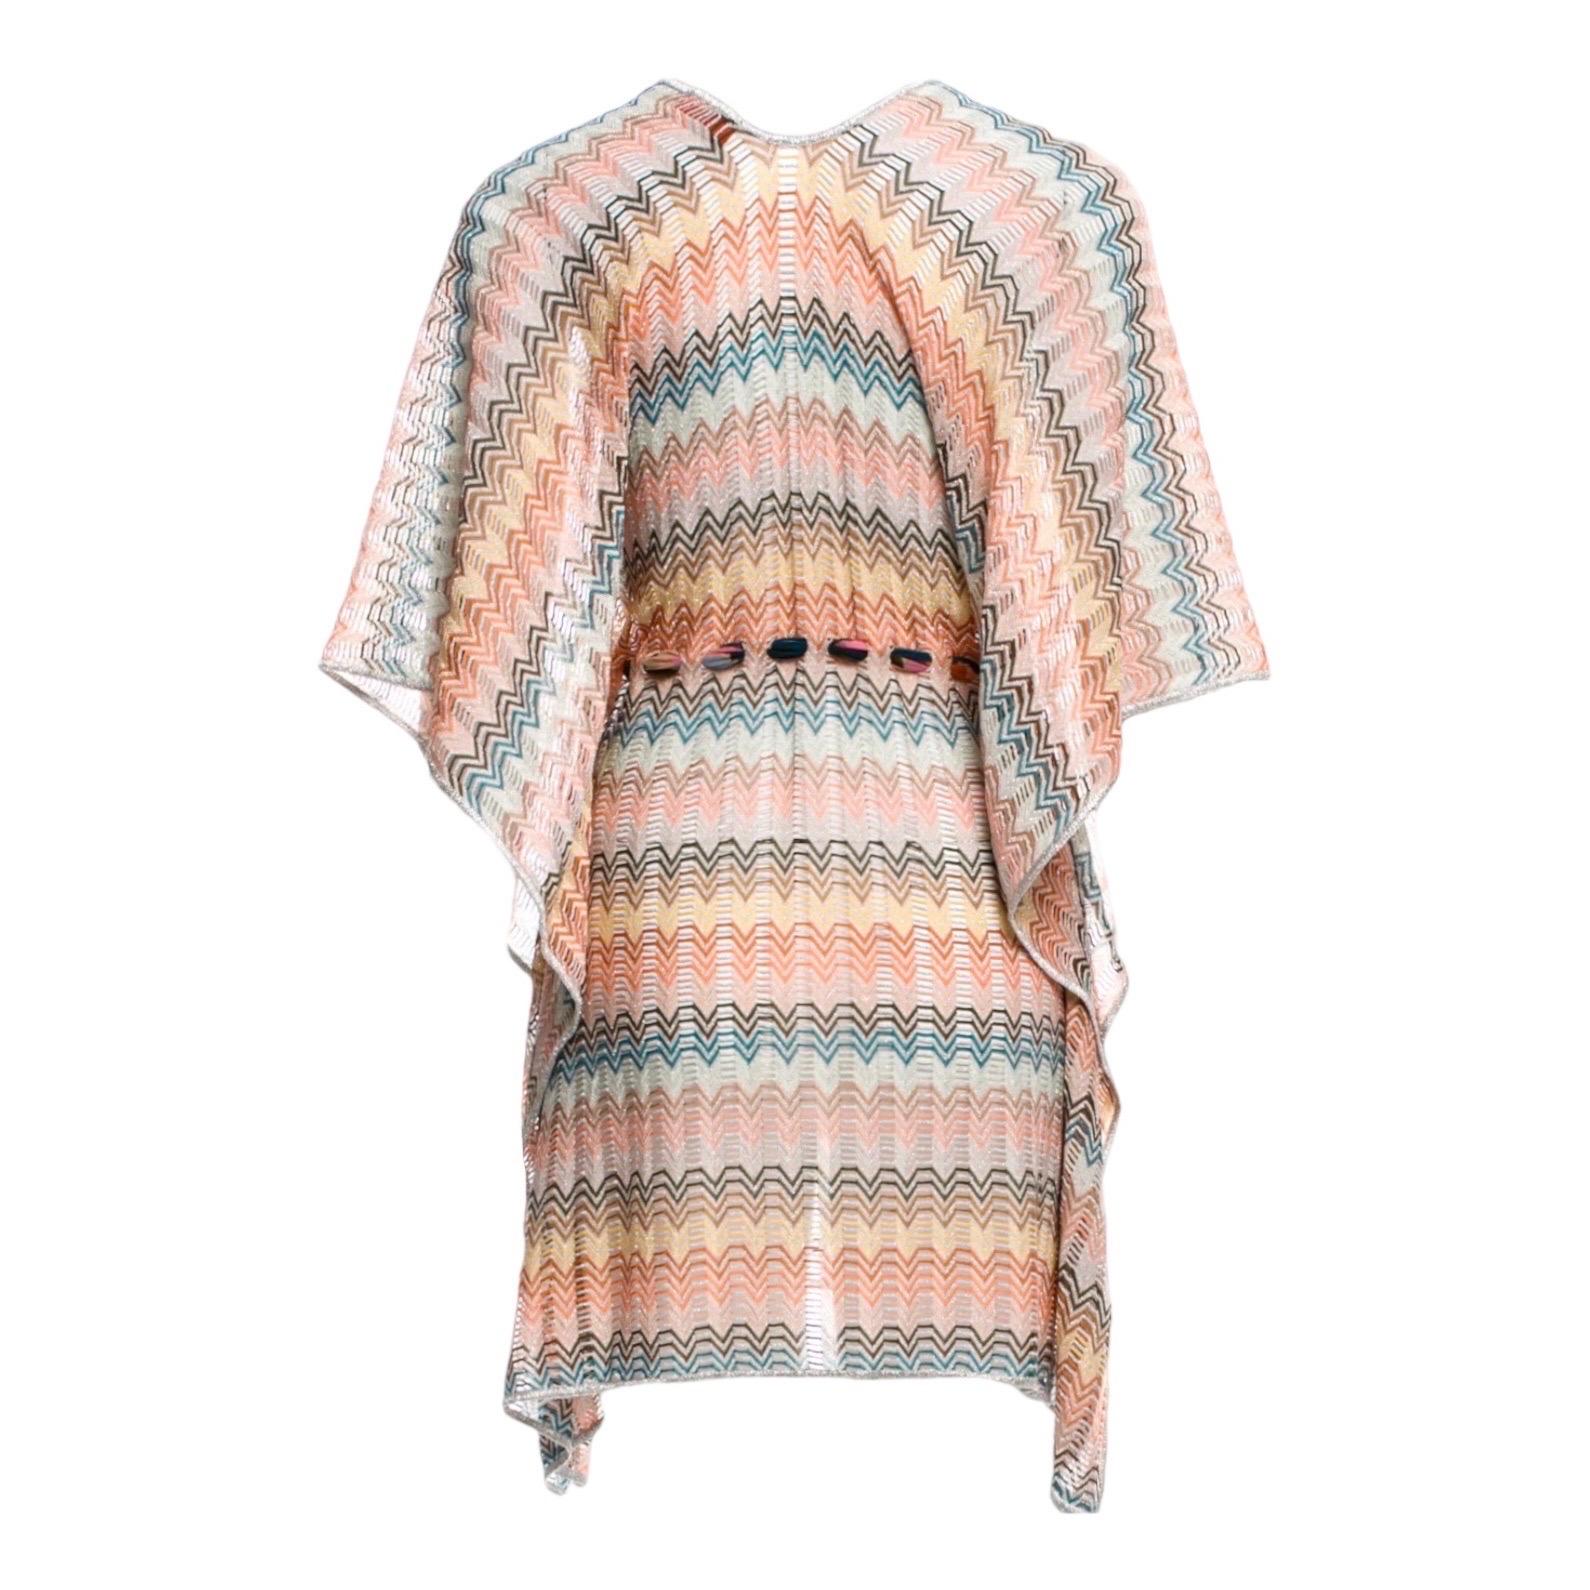 A rare MISSONI silver metallic crochet knit kaftan - sold out immediately
Grab your chance to own this iconic MISSONI piece!

DETAILS:

    Classic MISSONI signature zigzag knit
Beautiful colors mixed with silver lurex thread
Golden trimmings
   